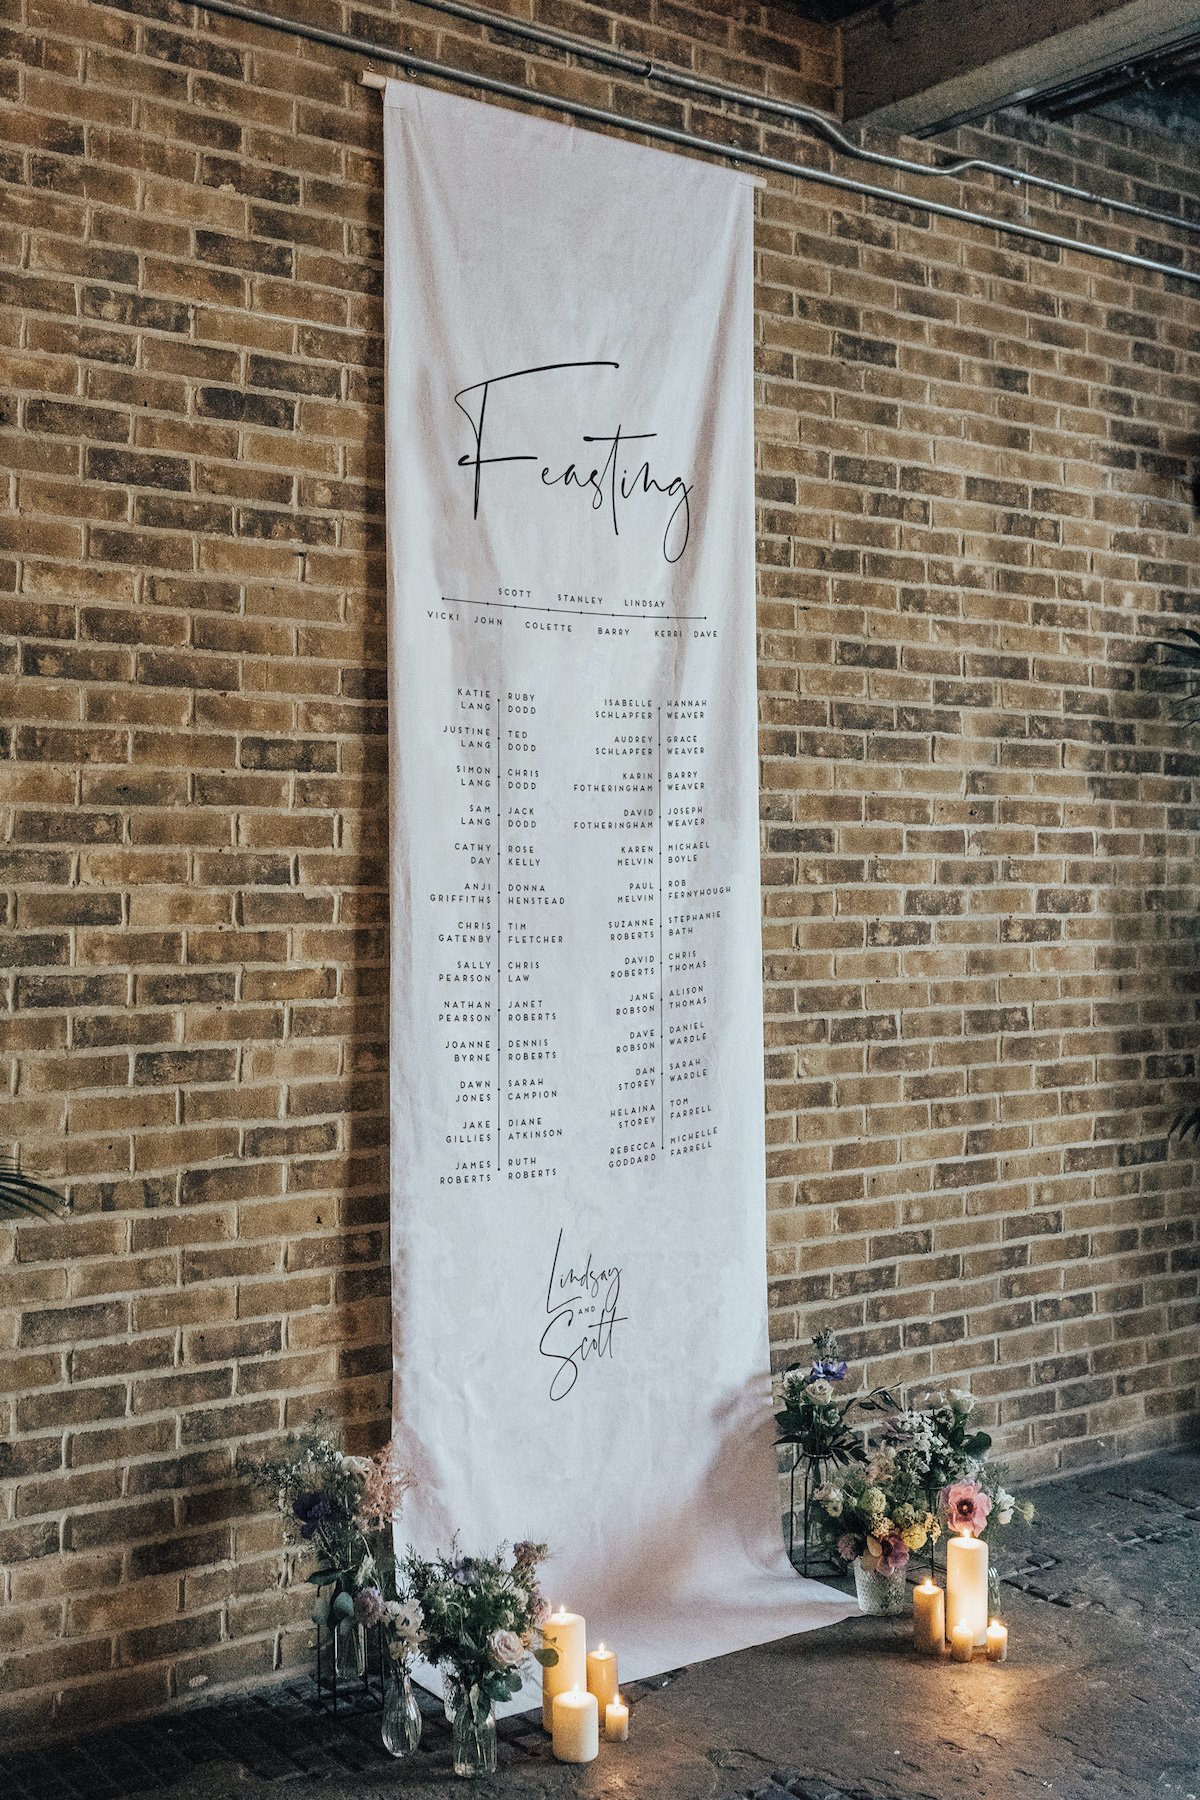 Made By Wood and Wood_wedding_signage_midnight_banner_table_plan_1.jpg